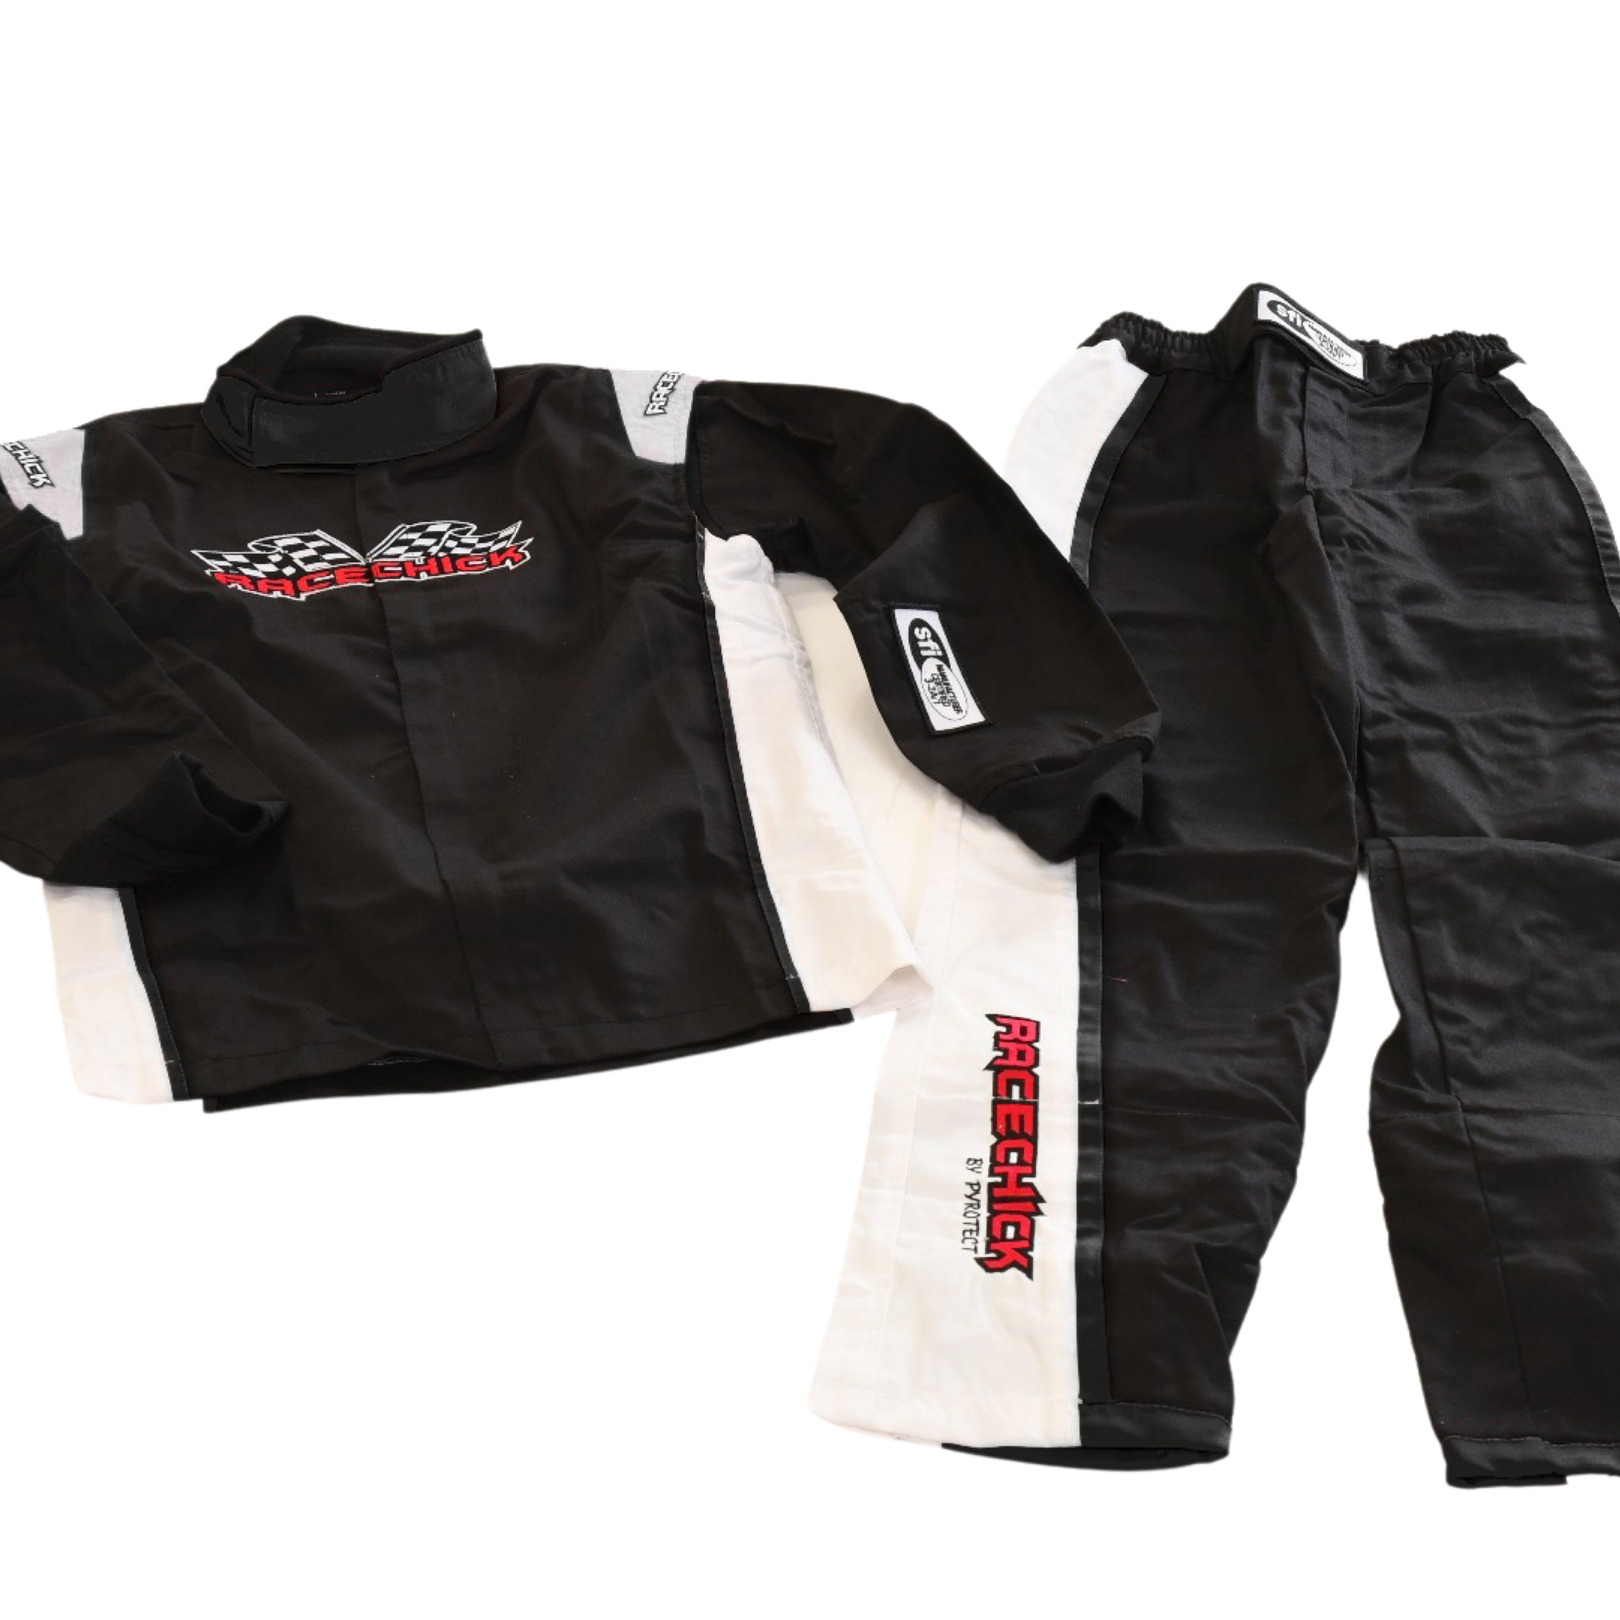 SFI 3.2A Rated Womens Two Piece auto racing fire suit for drag racing. Jacket & pants Race Suit